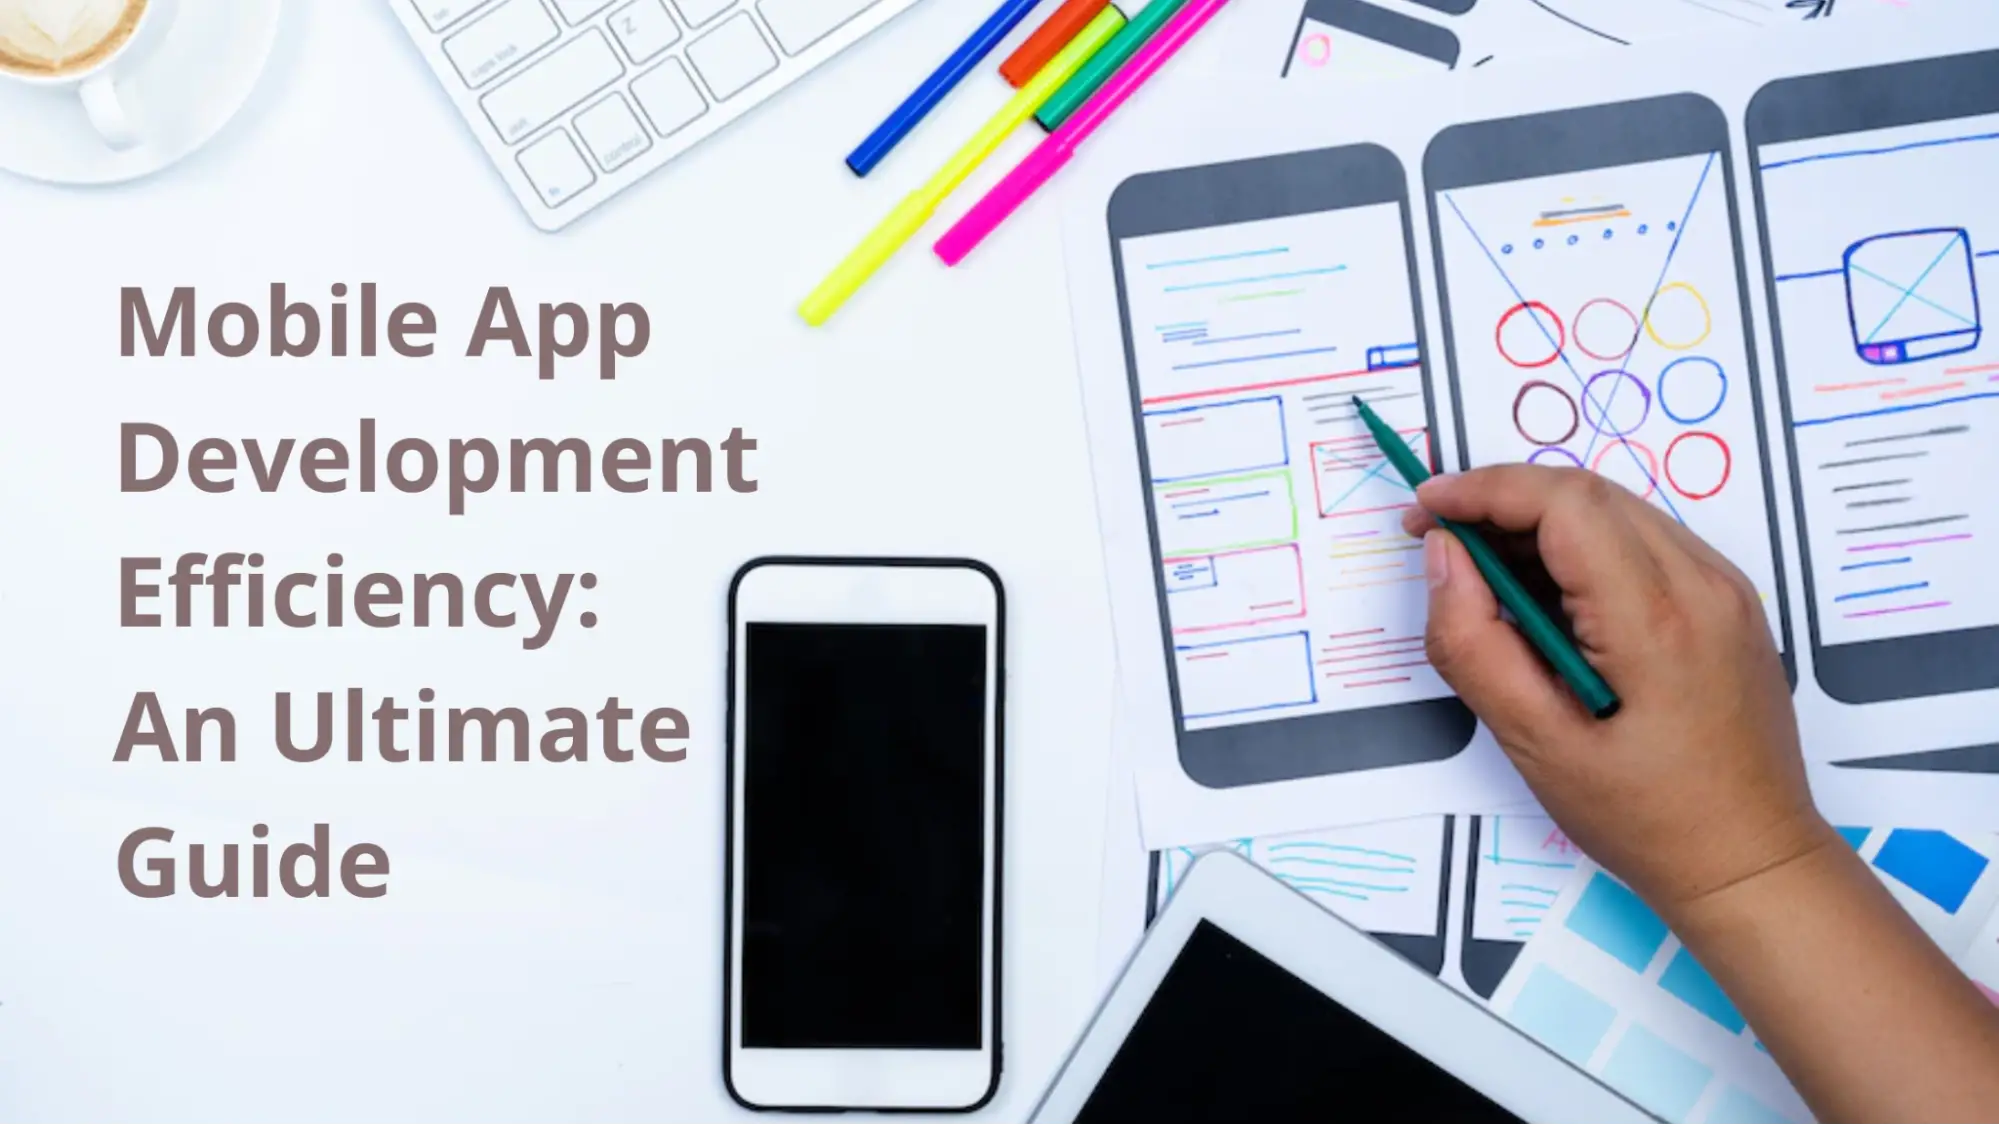 Mobile App Development Efficiency: An Ultimate Guide for Your Projects